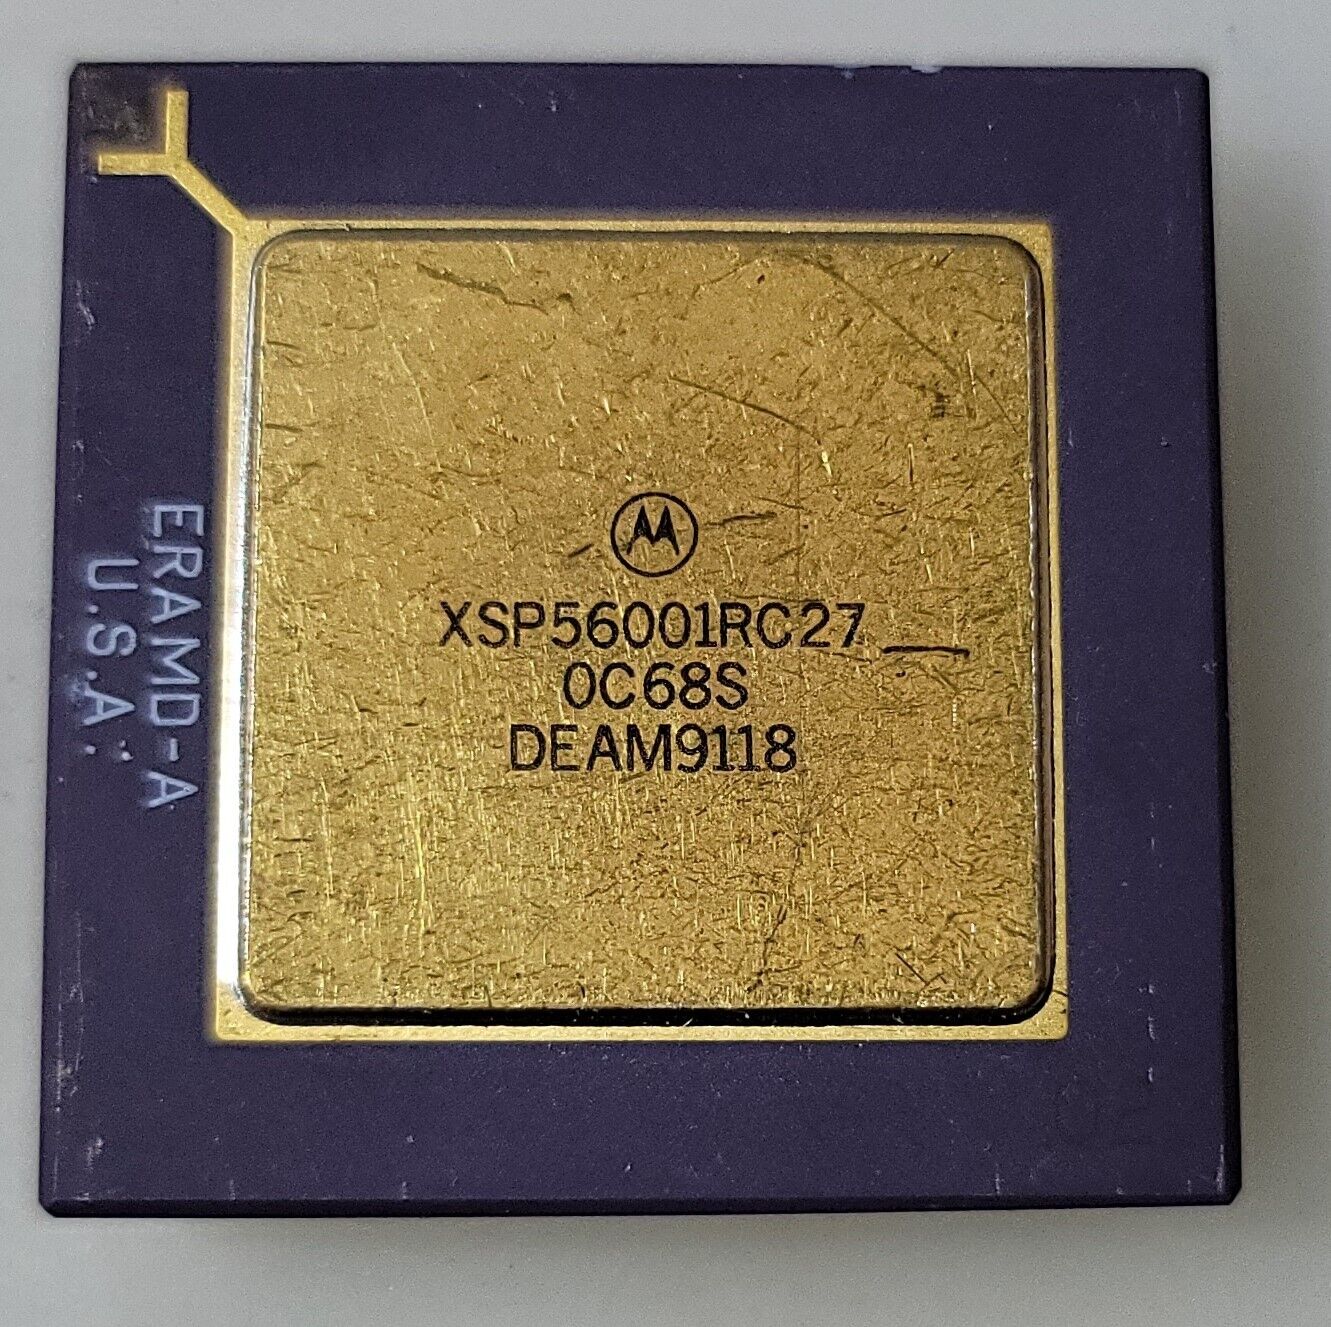 Vintage Rare Motorola XSP56001RC27 Processor For Collection or Gold Recovery